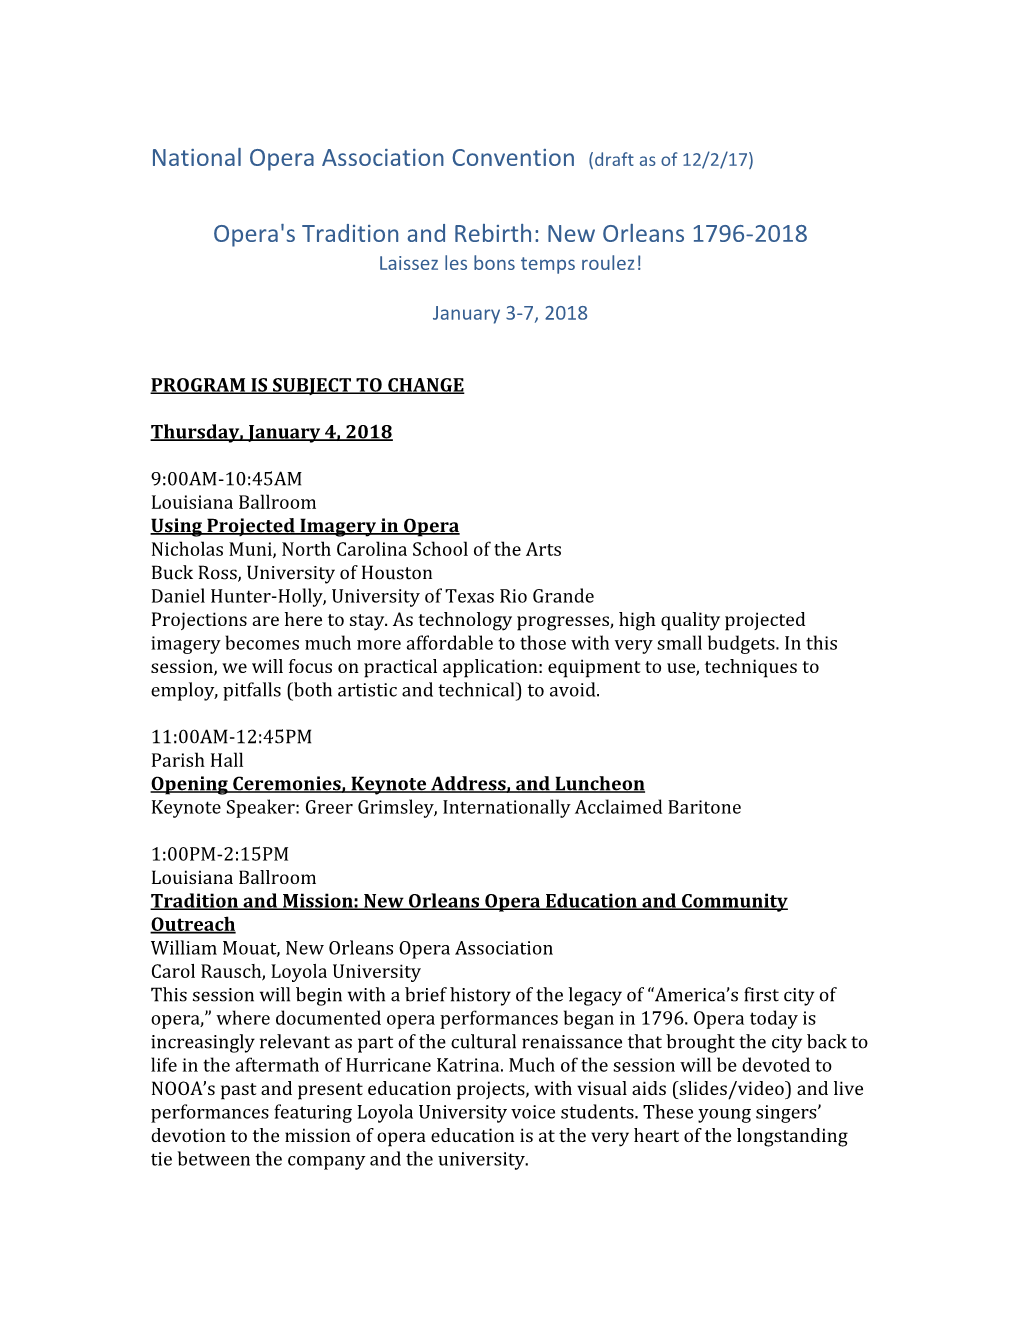 National Opera Association Convention (Draft As of 12/2/17) Opera's Tradition and Rebirth: New Orleans 1796-2018